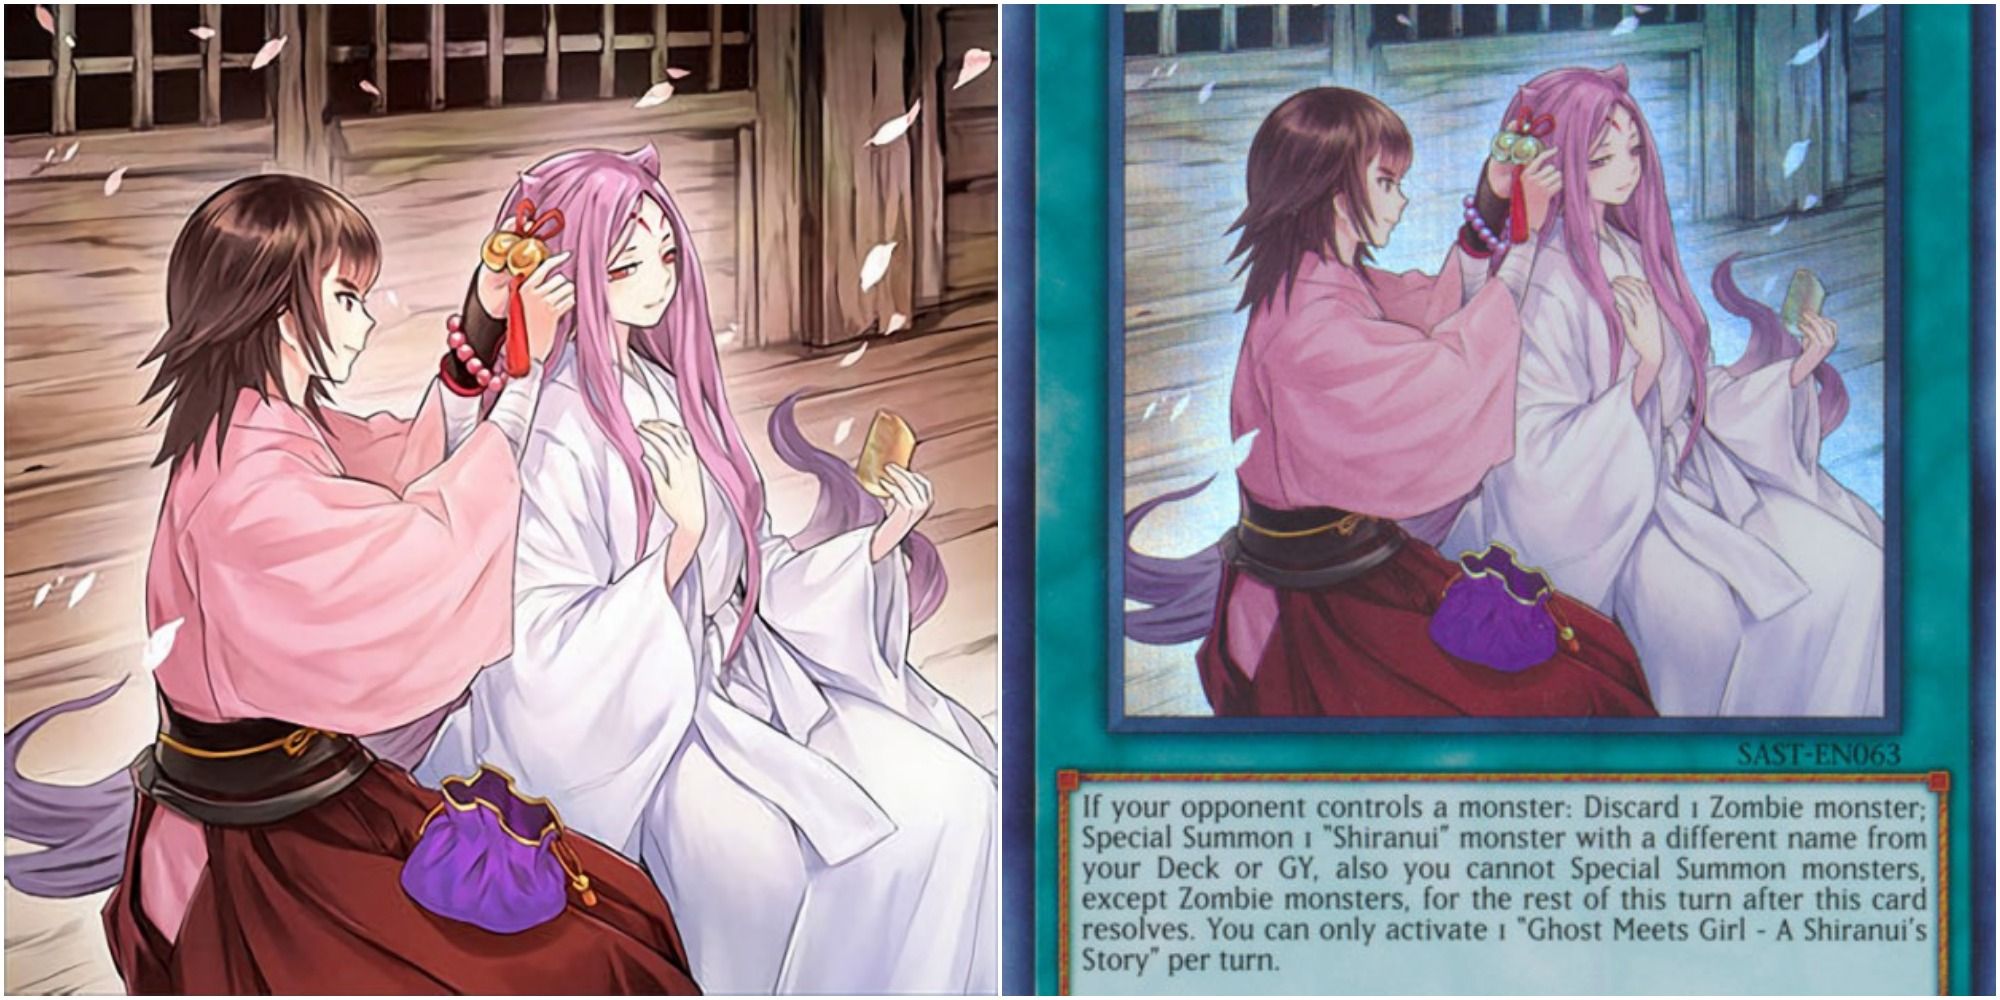 Ghost Meets Girl - A Shiranui's Story card art and text